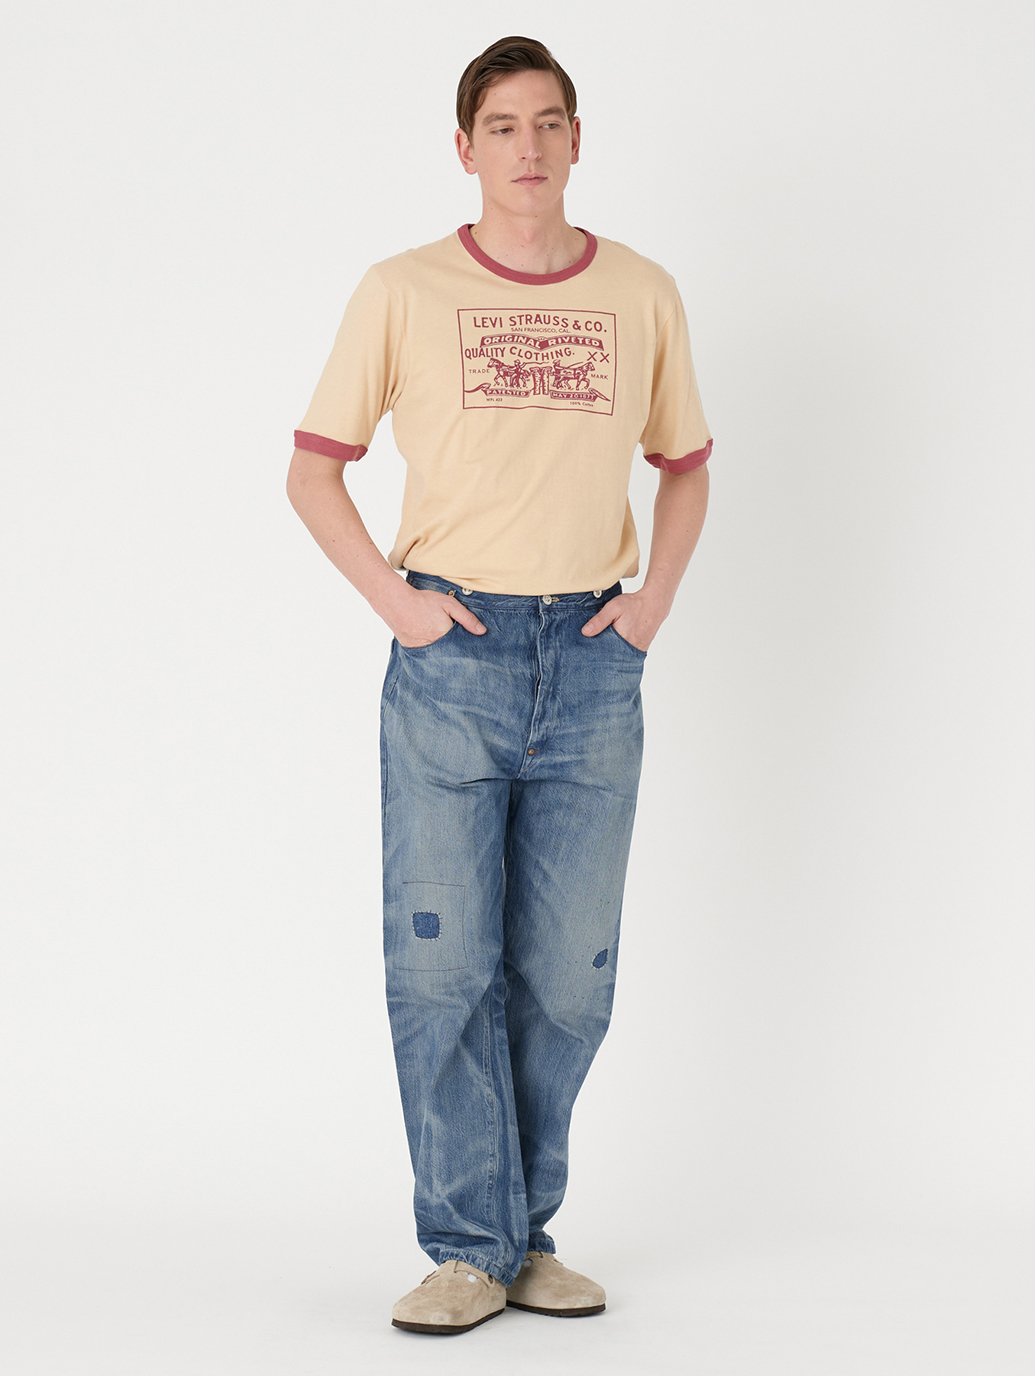 LEVI'S® VINTAGE CLOTHING 1870'S NEVADA OVRALL SIERRA インディゴ